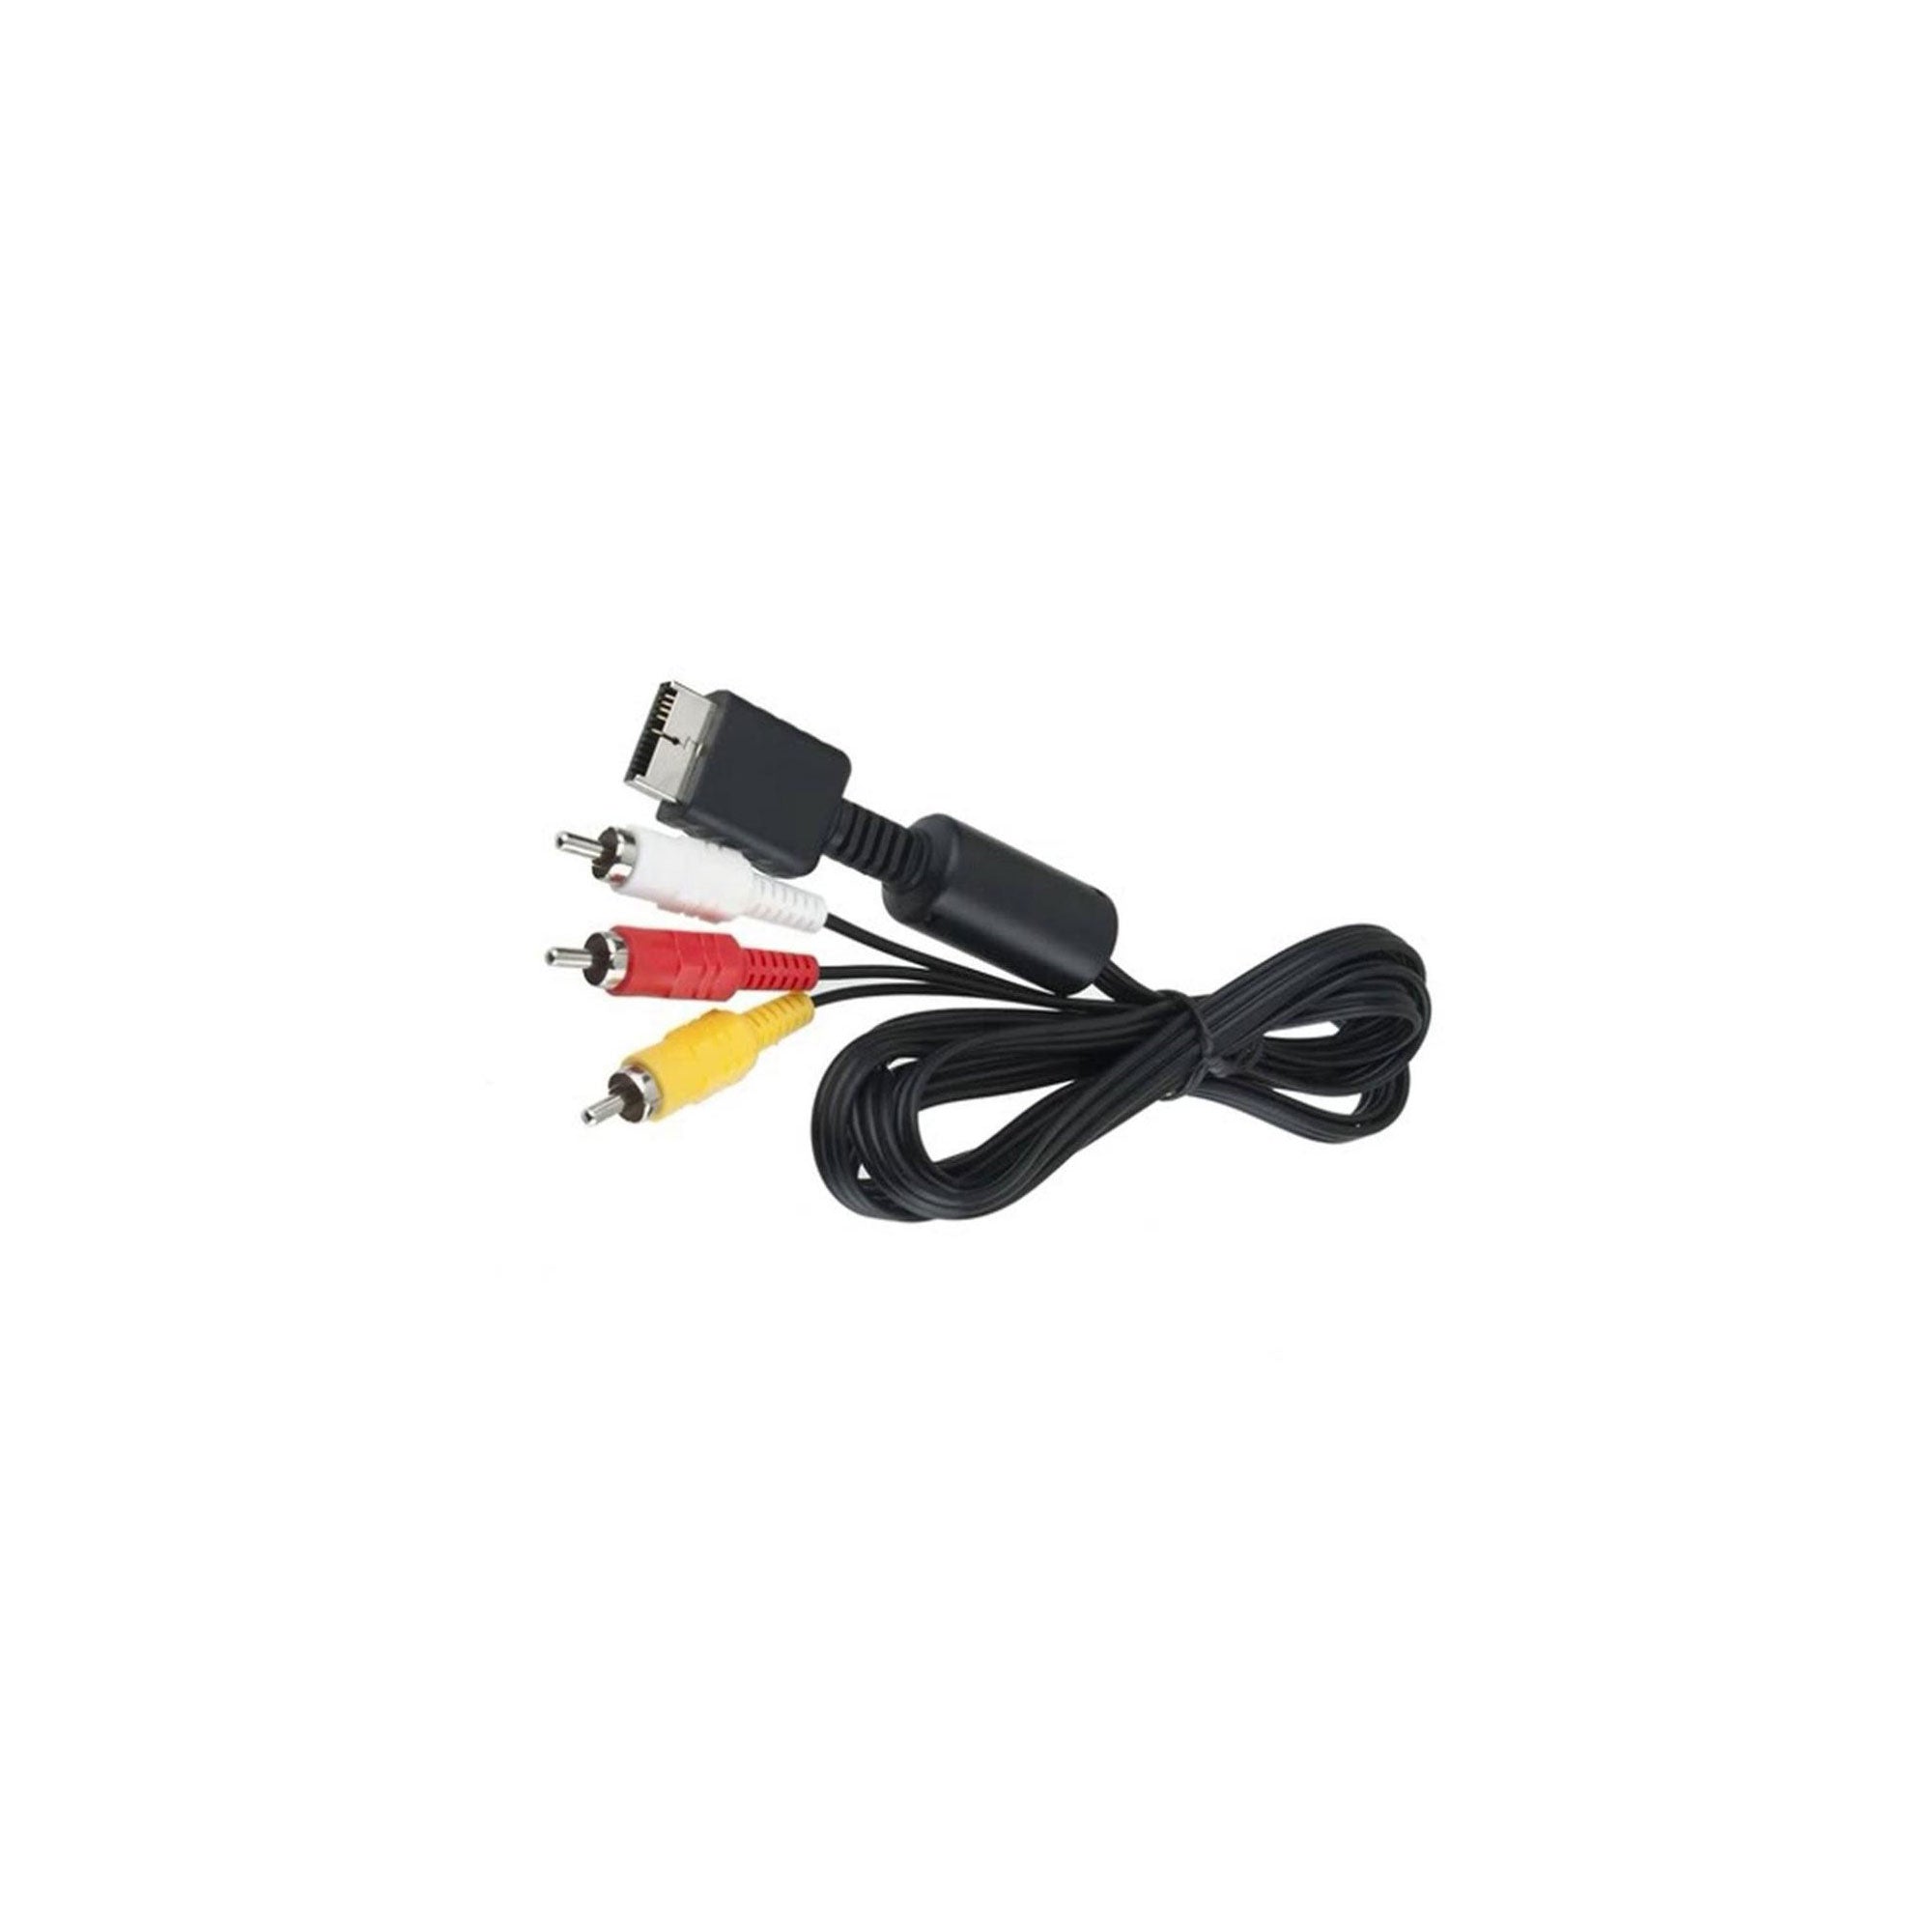 RCA Video Cable for Sony PlayStation Consoles